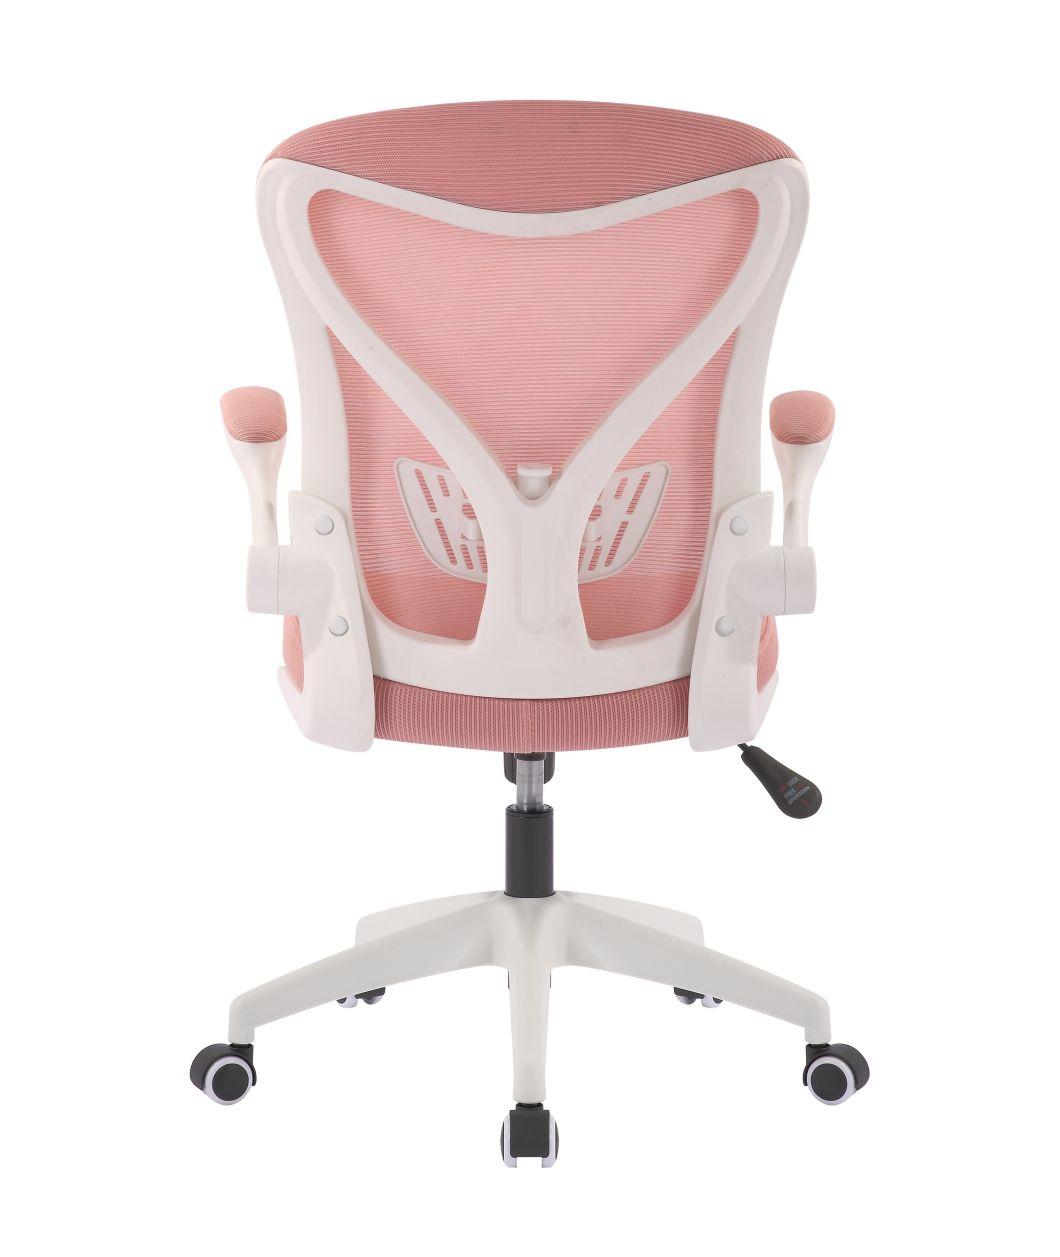 Adjustable Height Ergonomic Desk Computer Mesh Office Chair with Lumbar Support and Flip-up Arms